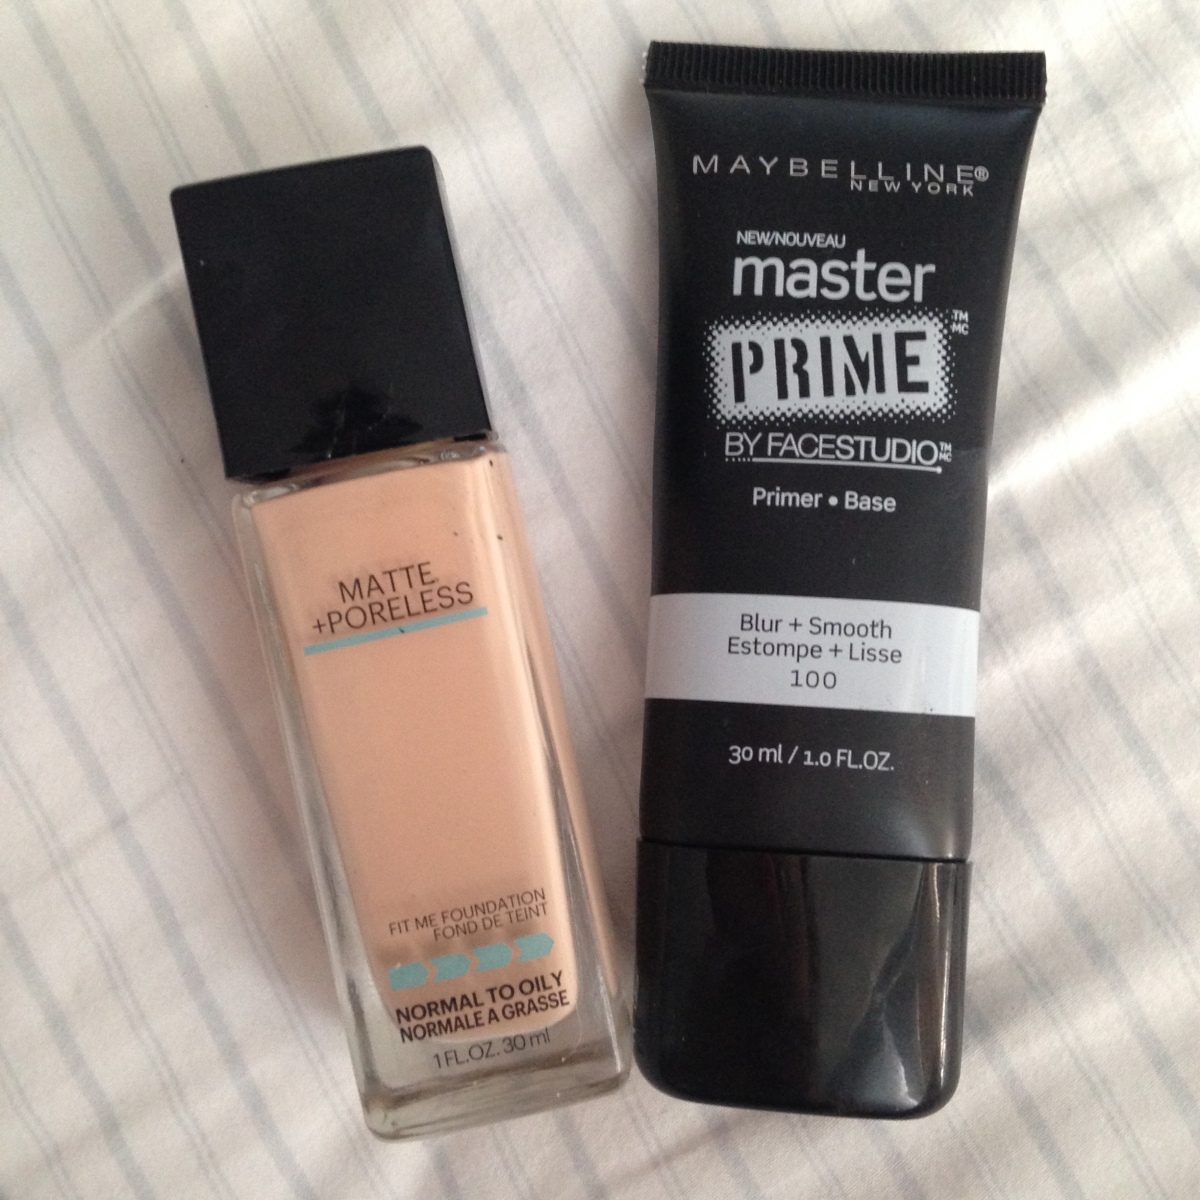 Me ALL & Face Foundation- THINGS – Maybelline LIFESTYLE Maybelline Matte Poreless + & Fit MAKEUP, Primer FASHION